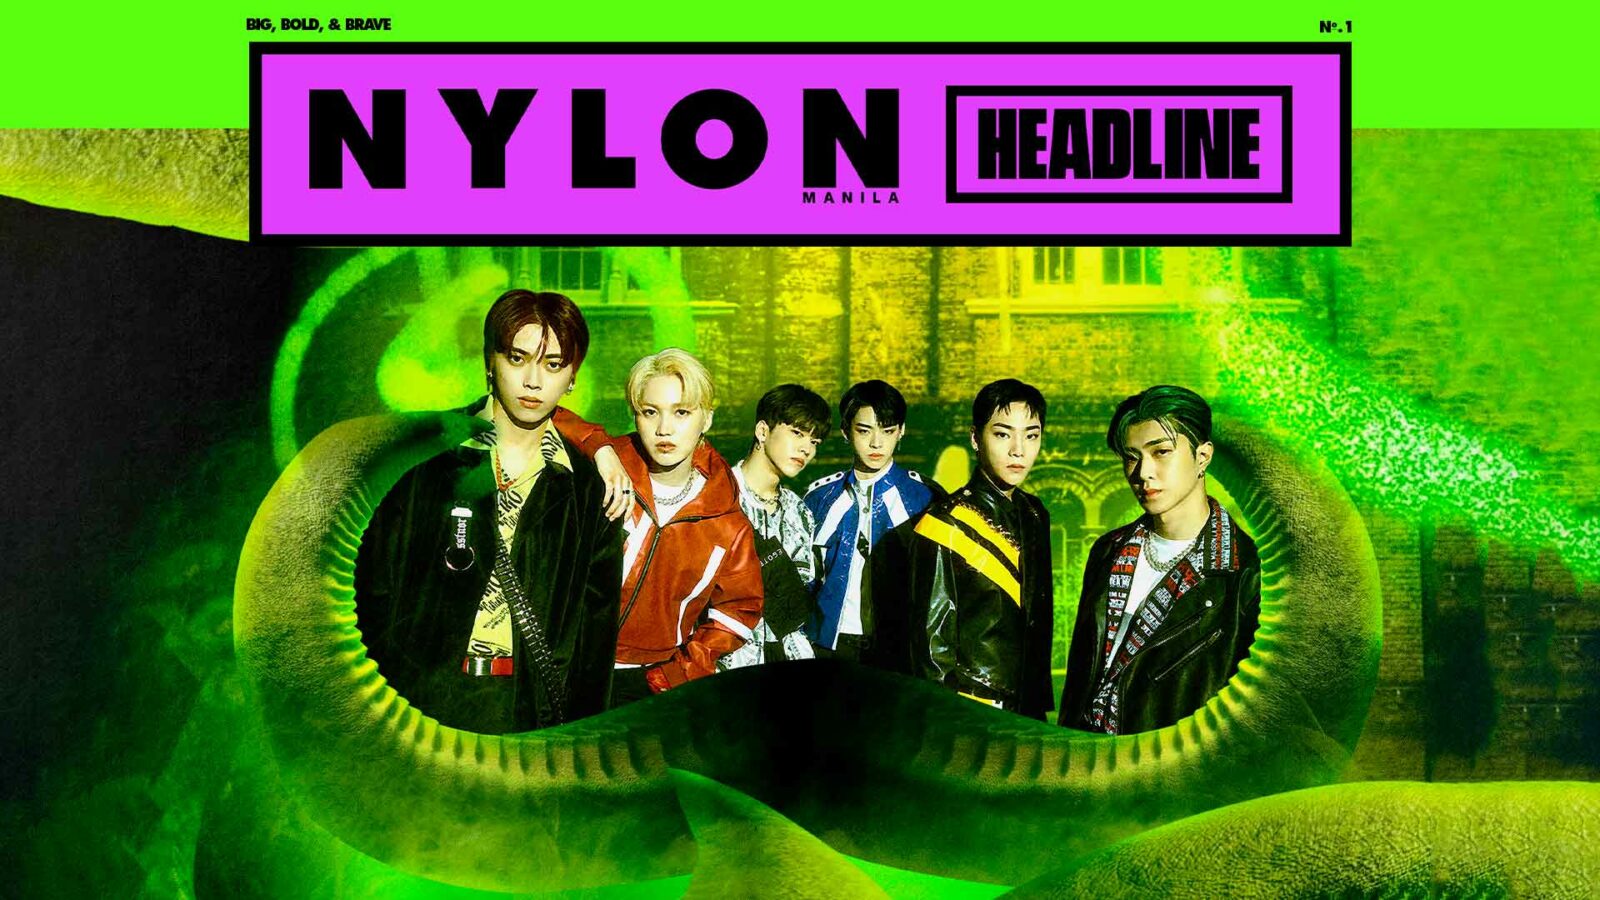 ONF NYLON Manila Headline - Collage by Kenneth Dimaano